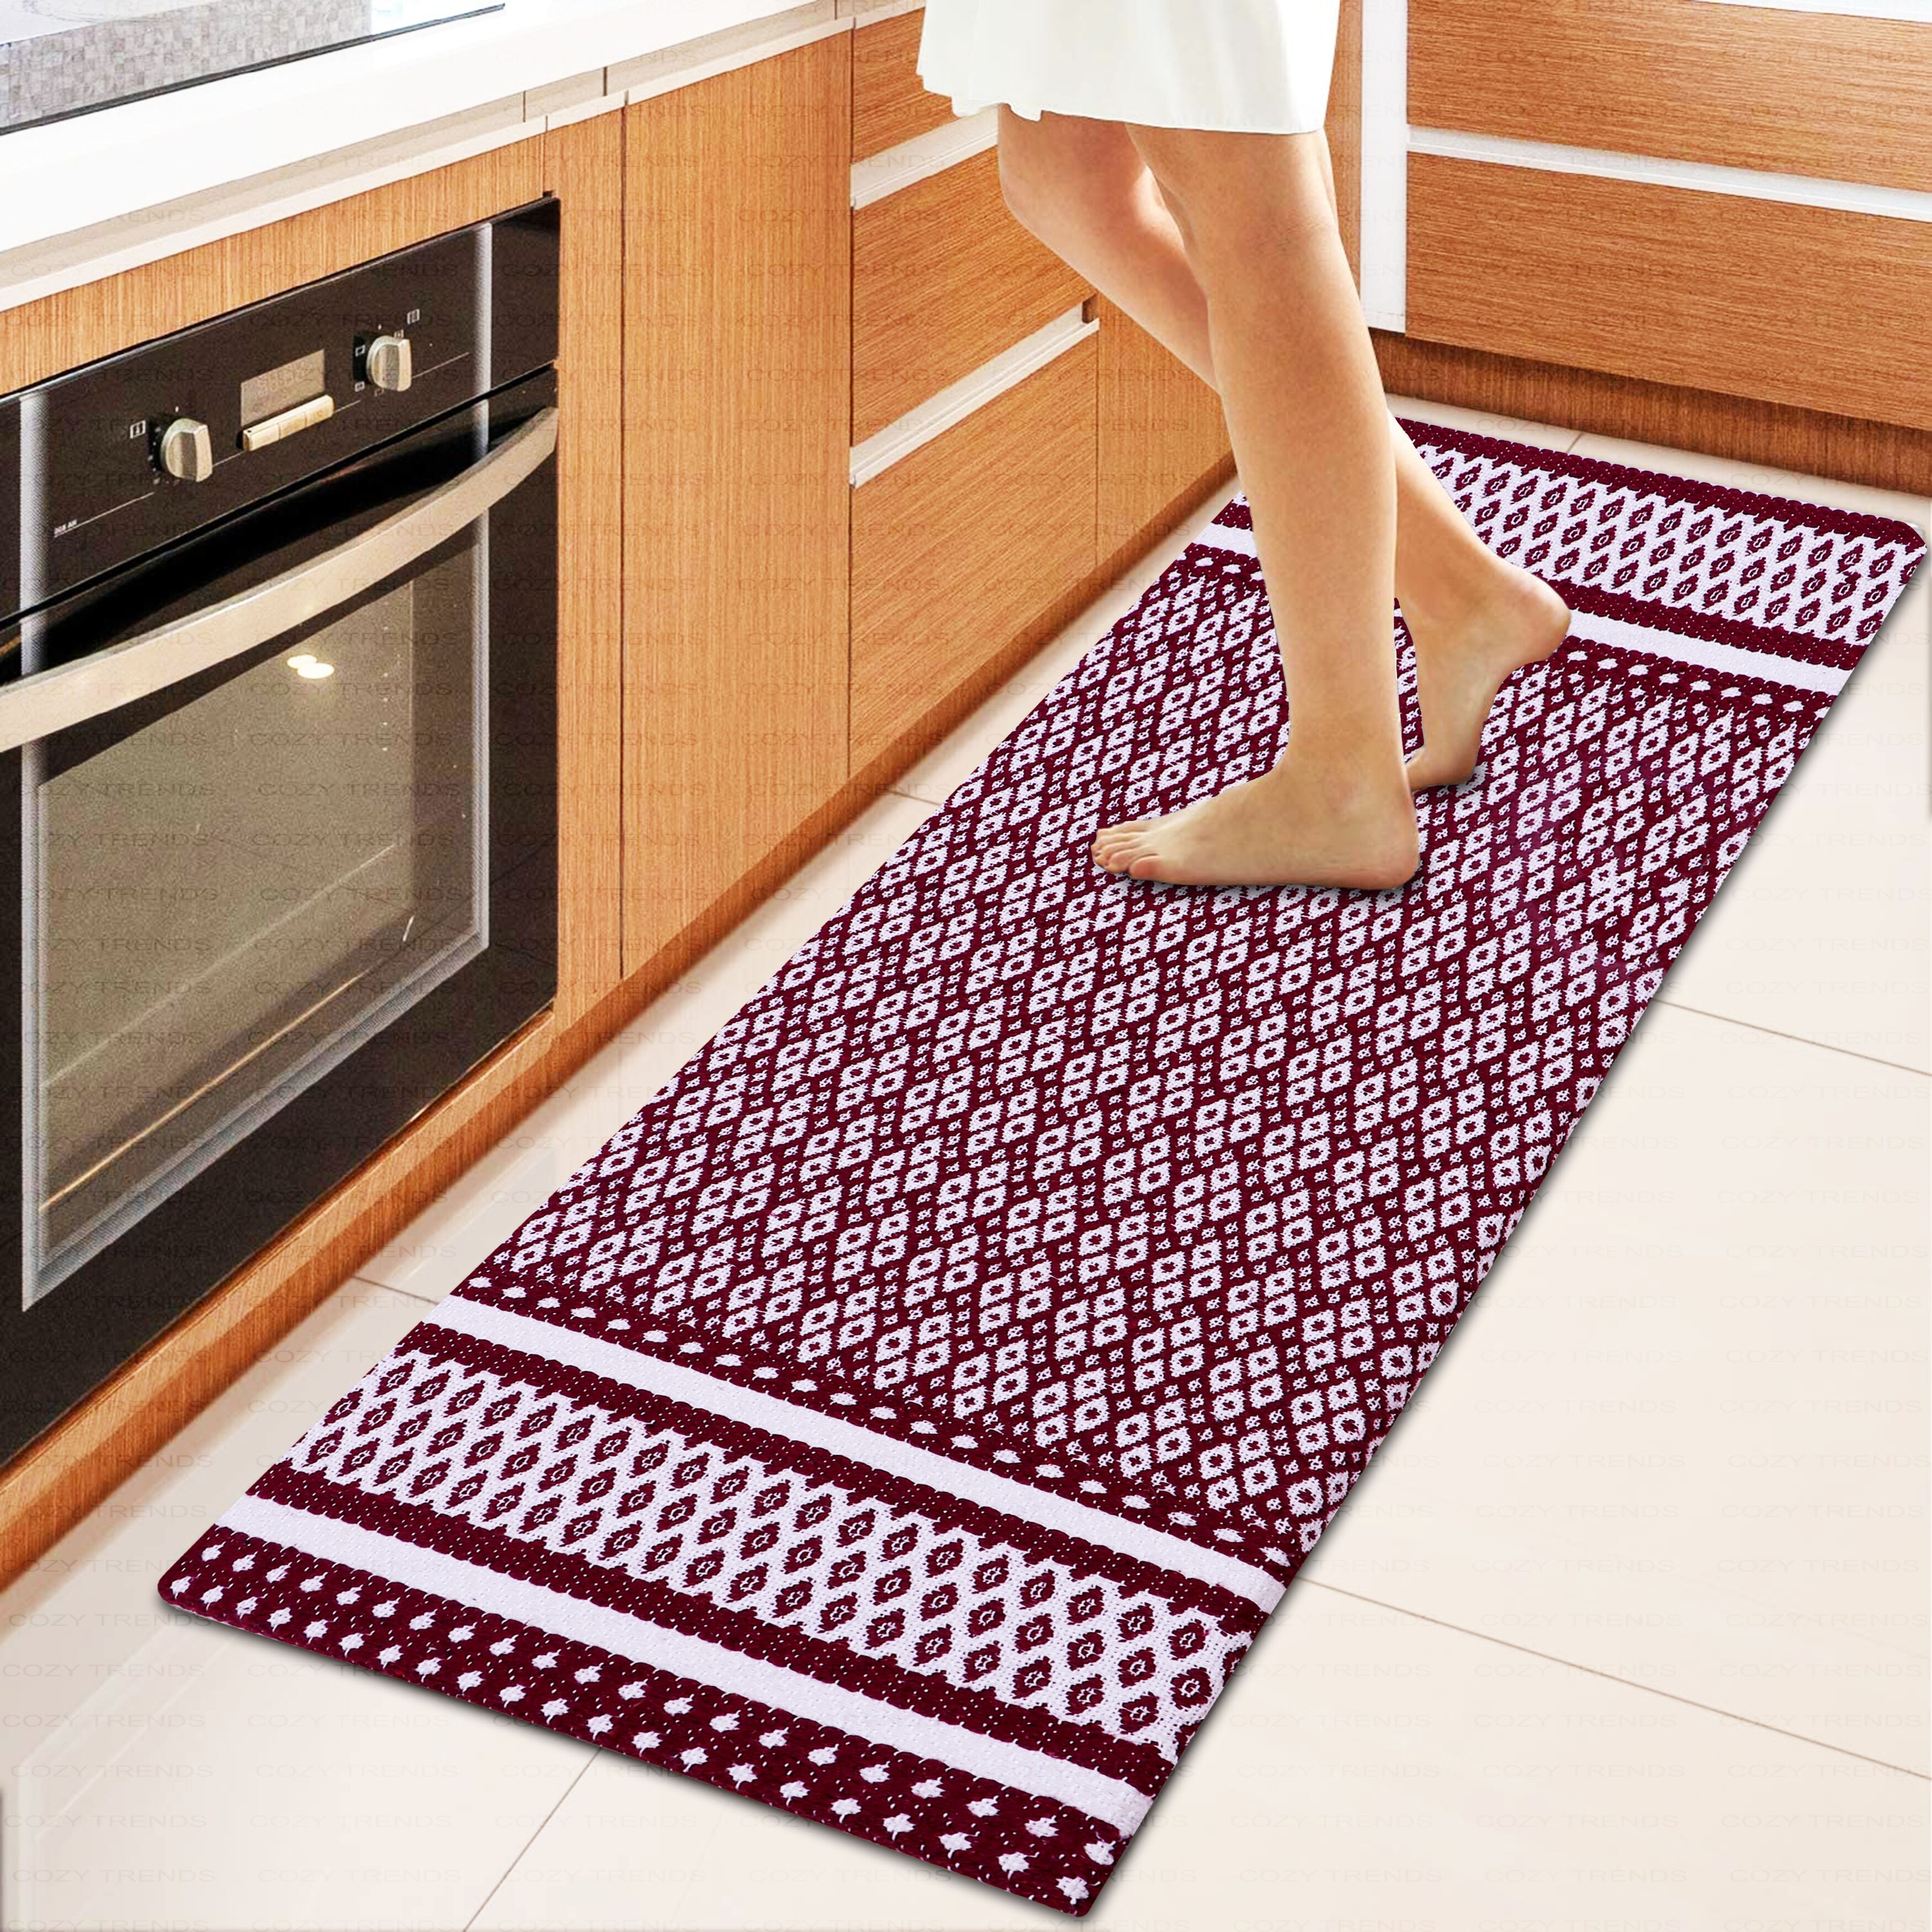 https://ak1.ostkcdn.com/images/products/is/images/direct/bb708b9ef00988476e752e9762eb3d2538c4ae85/Woven-Cotton-Anti-Fatigue-Anti-Skid-Cushioned-Kitchen--Doormat-Bathroom-Mats-%26-Runners.jpg